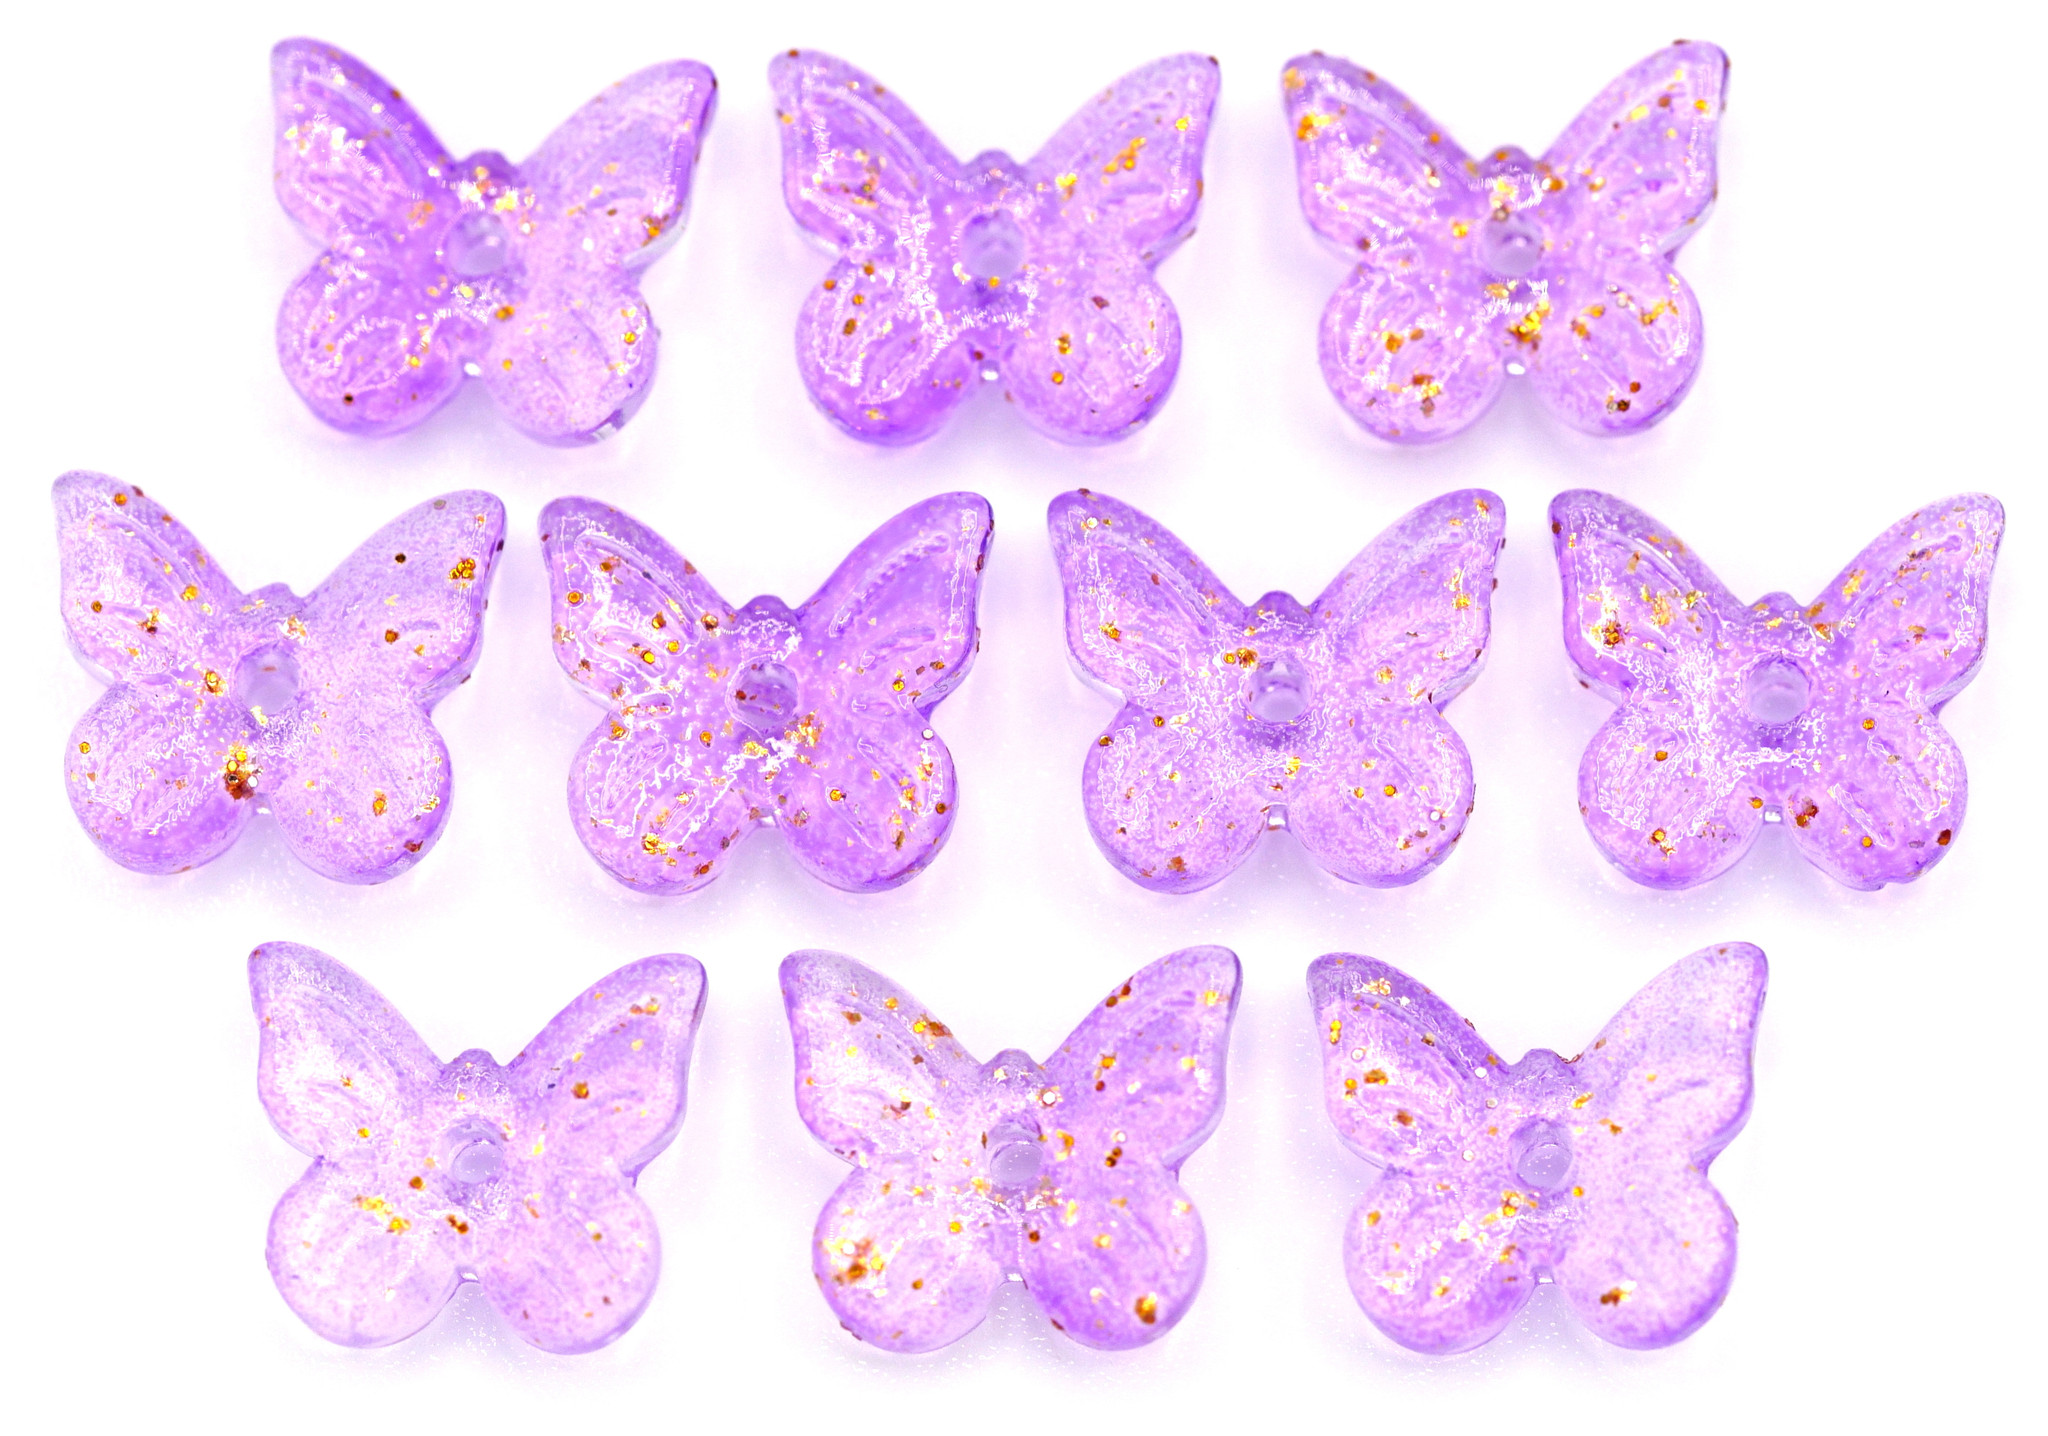 10pc 7x11mm Glass Butterfly Beads, Lilac/Gold Speckle